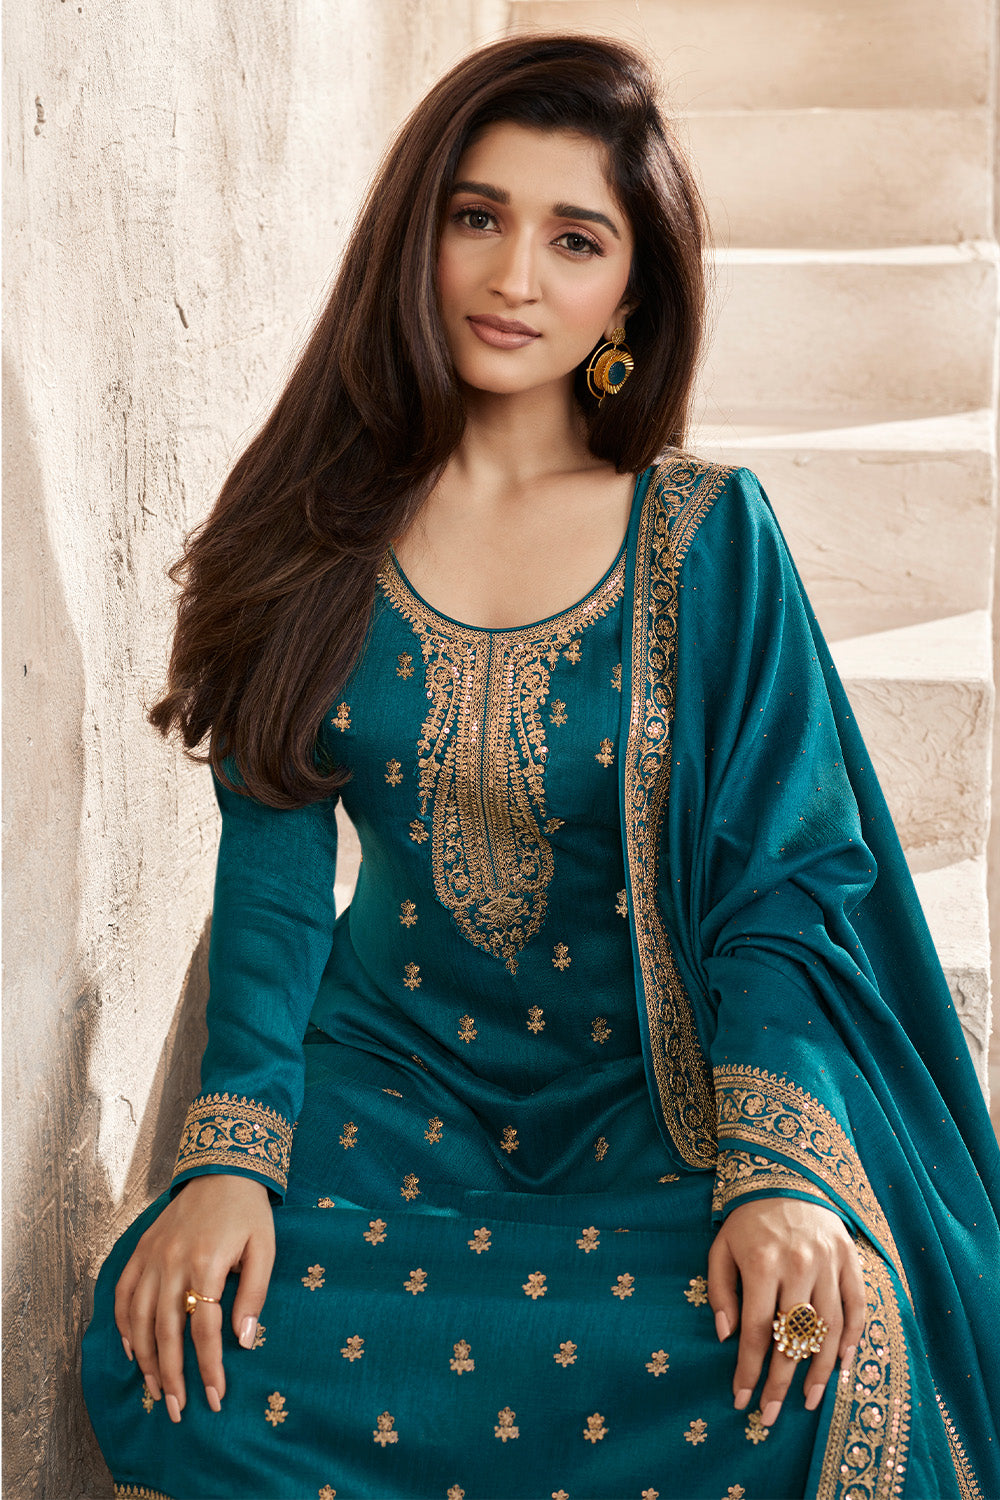 Teal Colour Zari Embroidered Silk Unstitched Suit Material